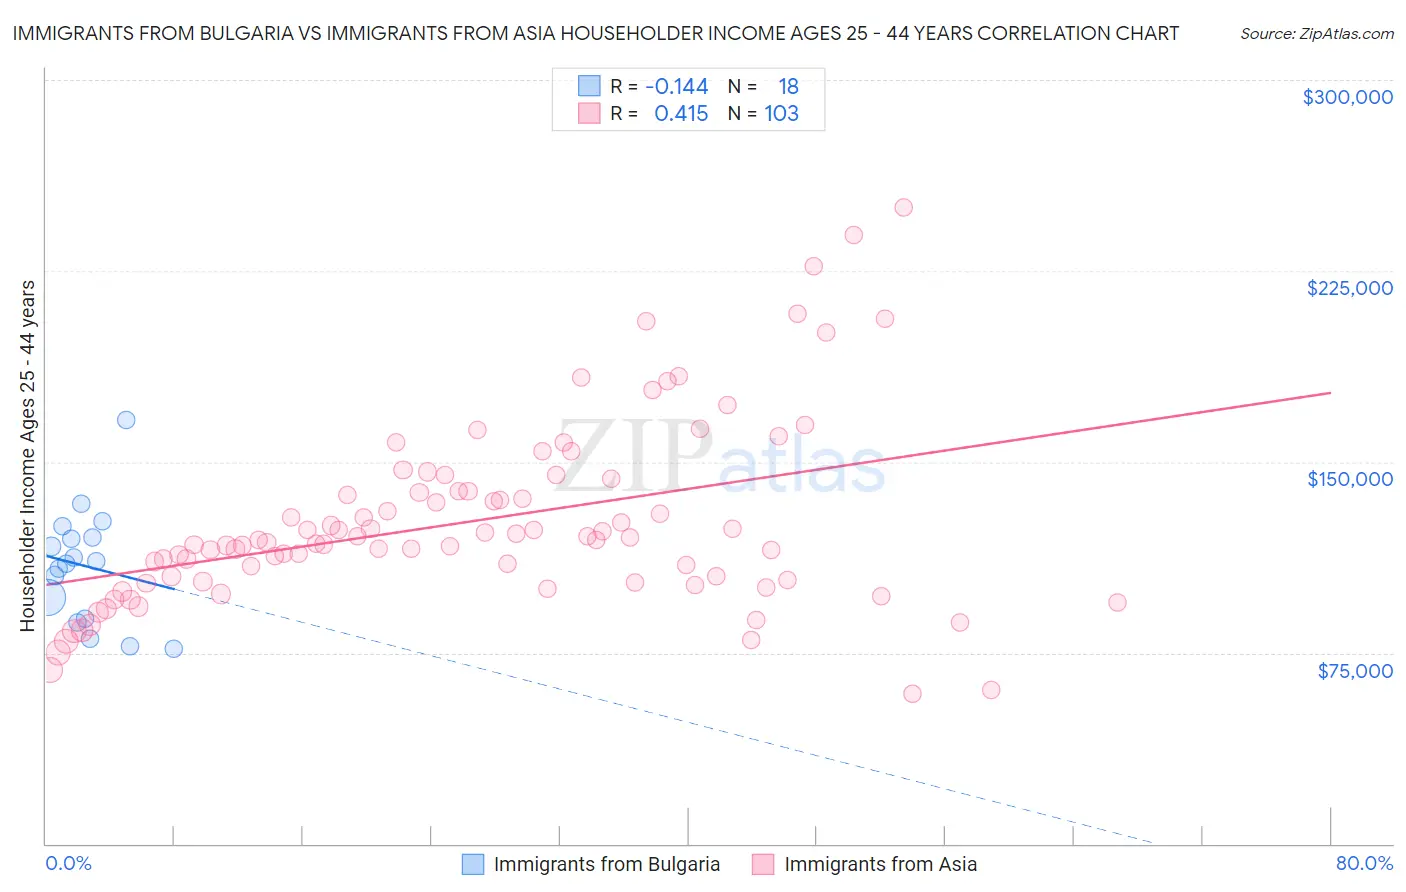 Immigrants from Bulgaria vs Immigrants from Asia Householder Income Ages 25 - 44 years